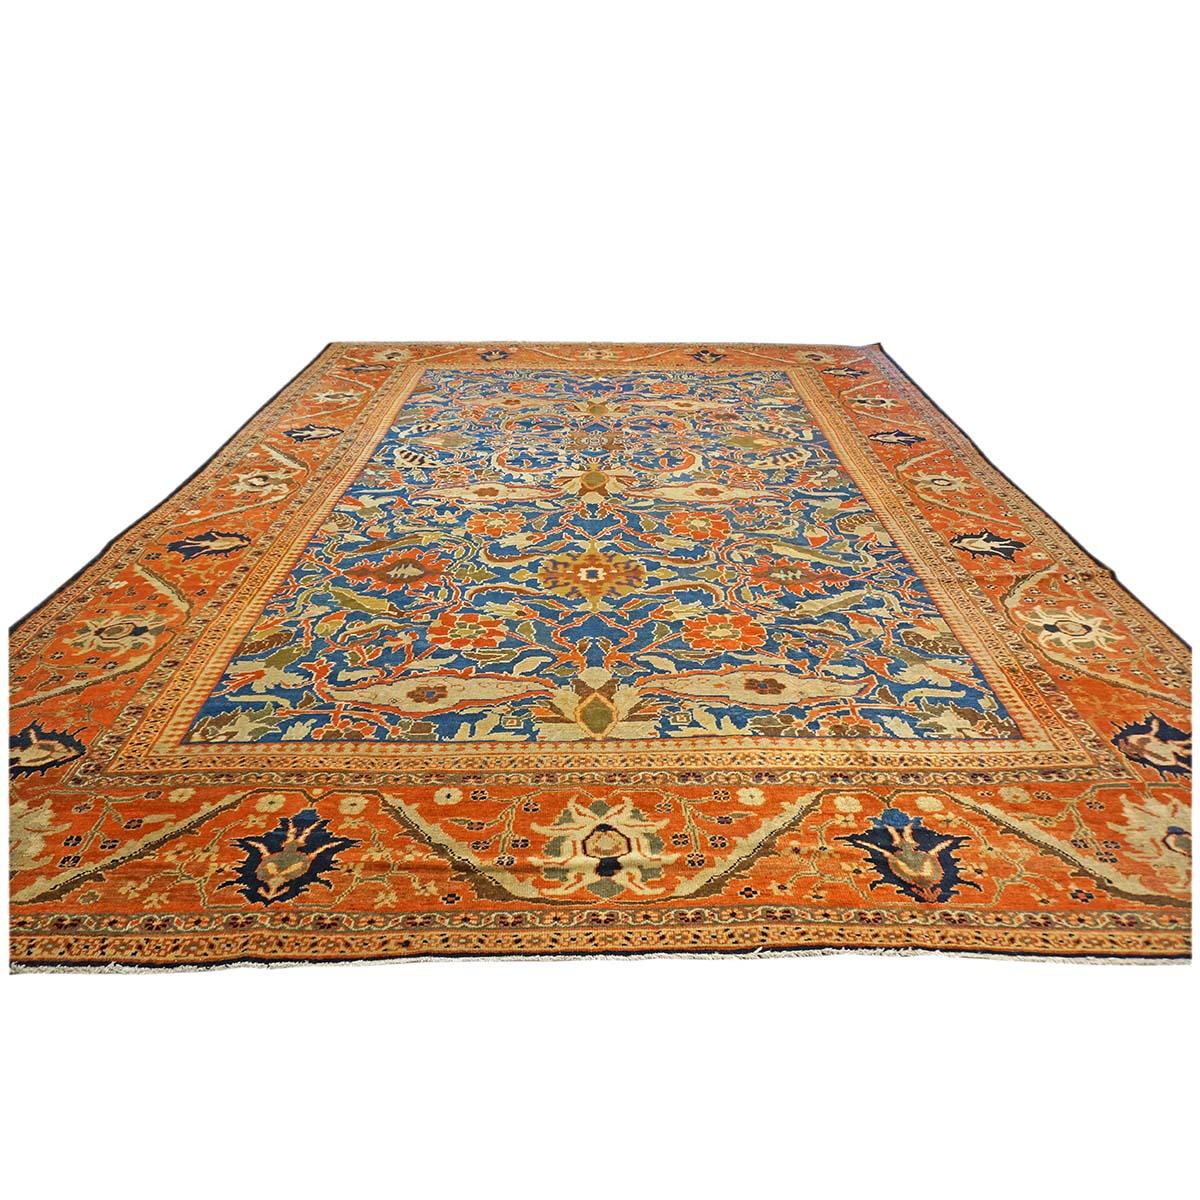 1850s Antique Persian Ziegler Sultanabad 12x15 Orange, Blue, & Ivory Area Rug In Good Condition For Sale In Houston, TX